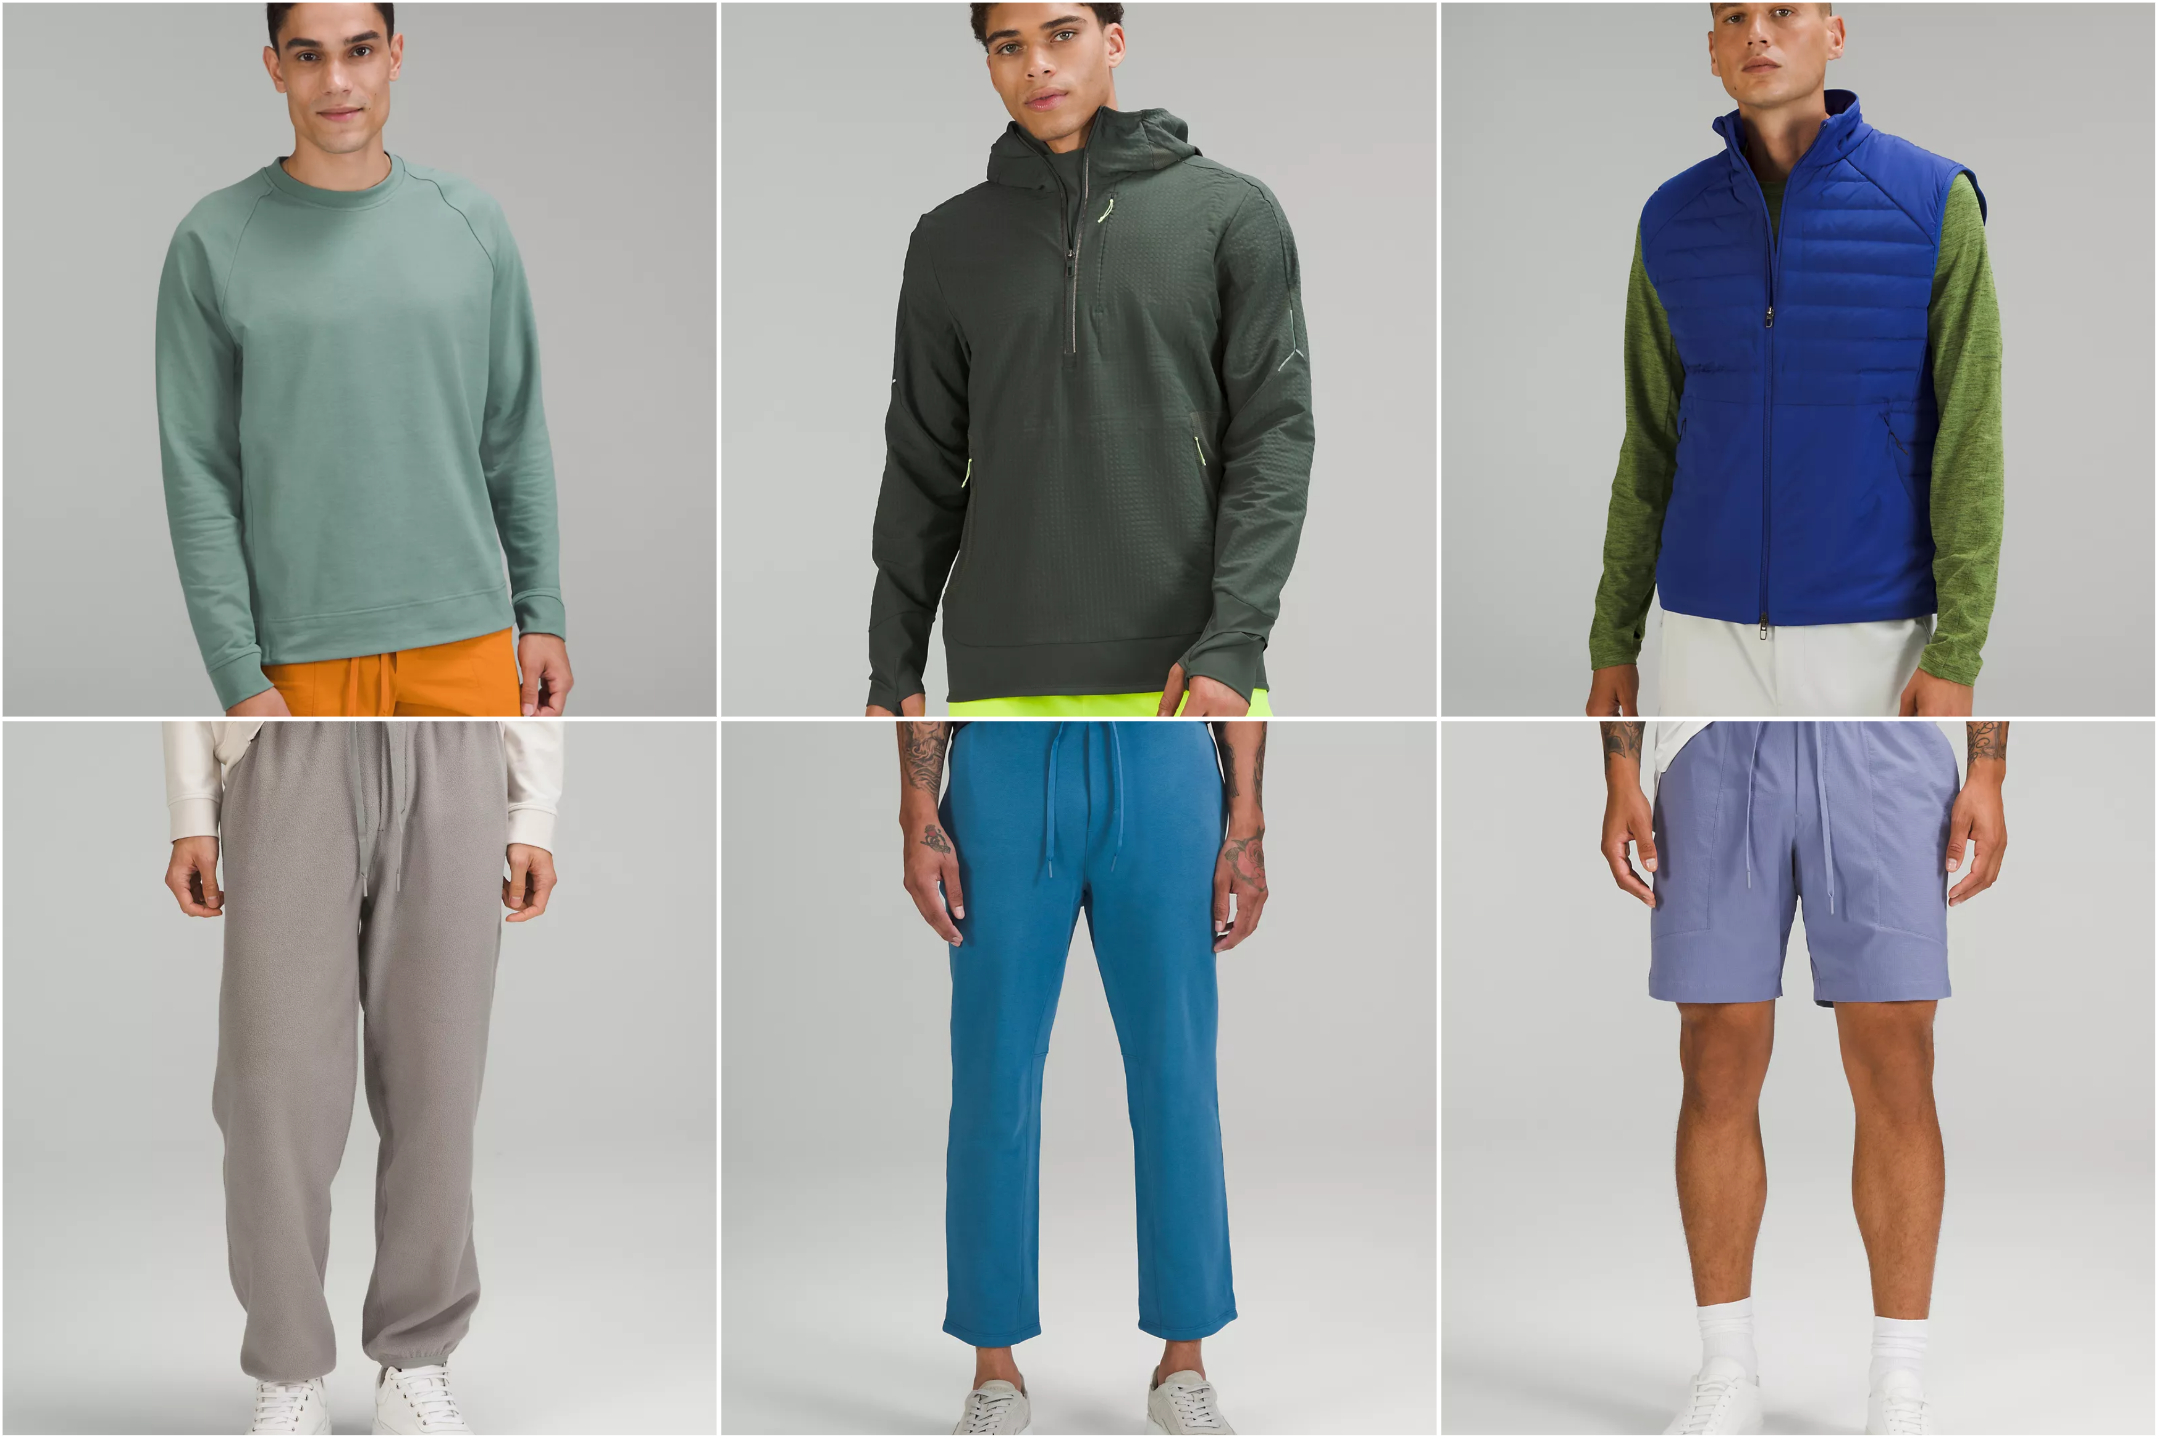 The Ultimate Men's Guide To The lululemon End Of Year Sale - BroBible